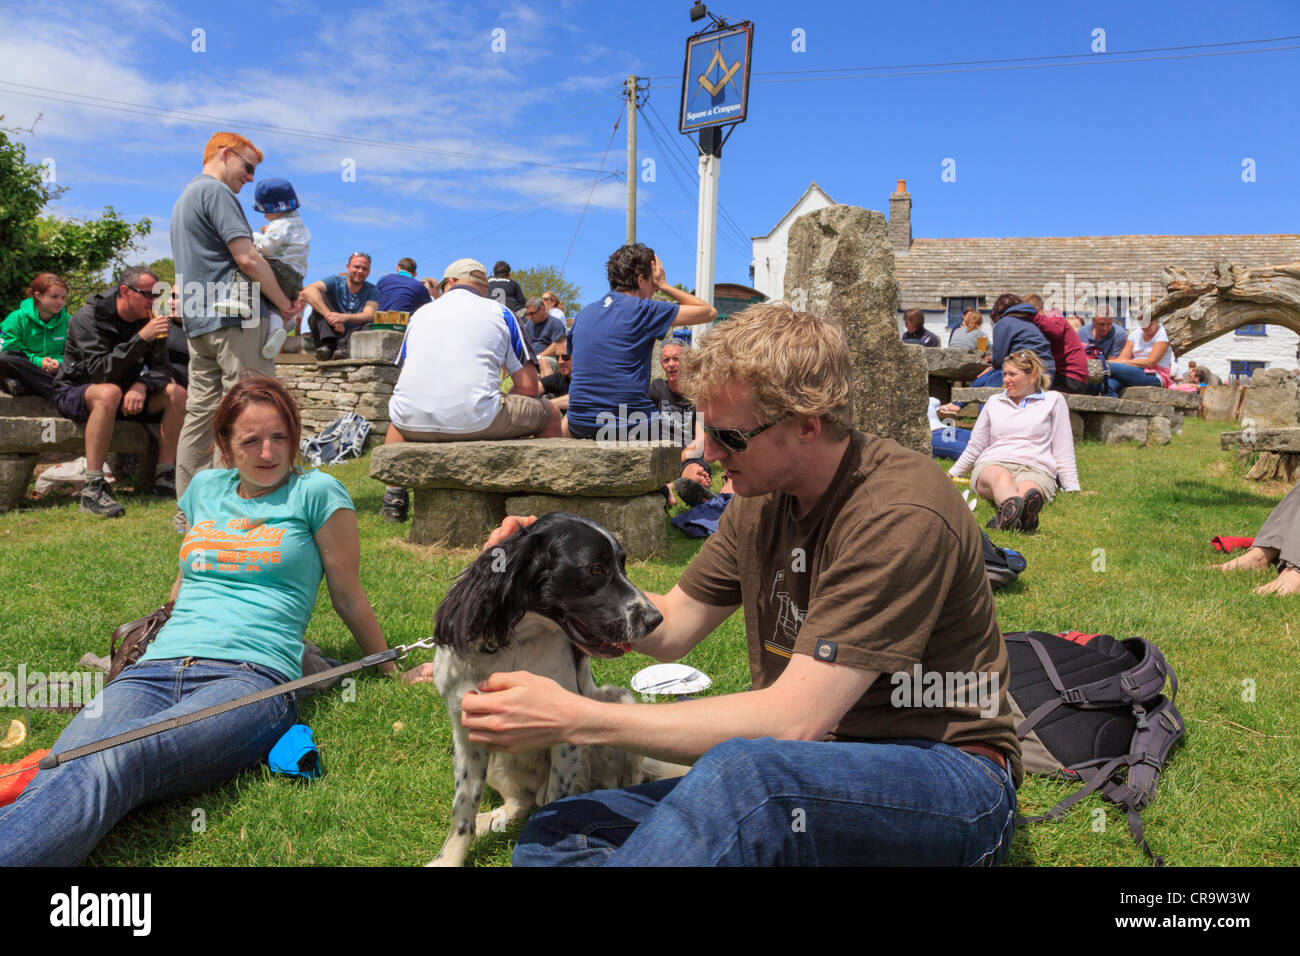 Authentic scene with customers sitting in busy beer garden of Square and Compass country village pub lifestyle. Worth Matravers Purbeck Dorset UK Stock Photo